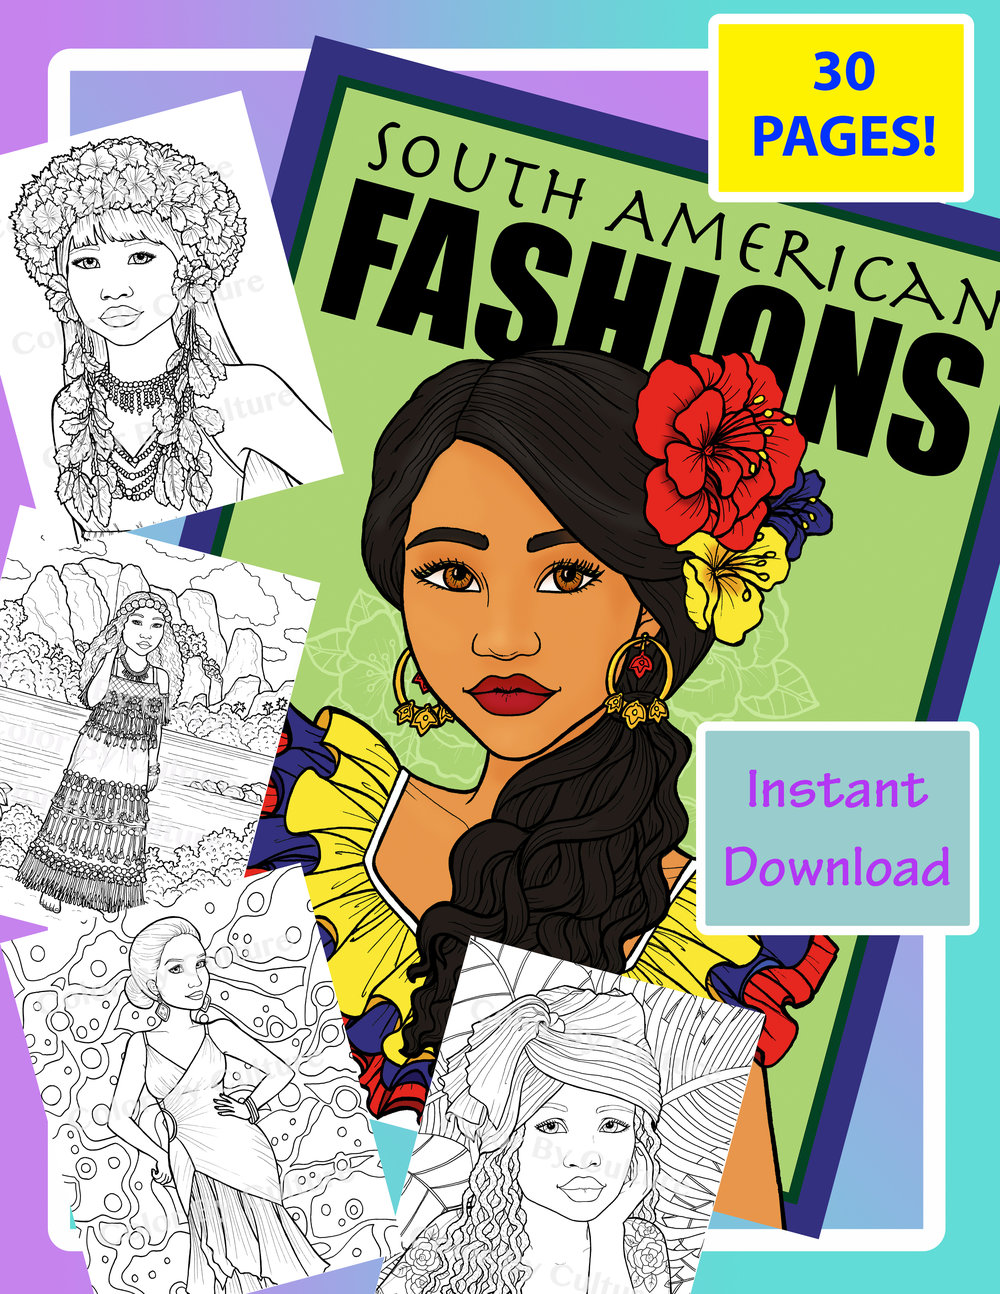 Beautiful Black Women coloring book for adults: Beautiful African American  Women Portraits to Color